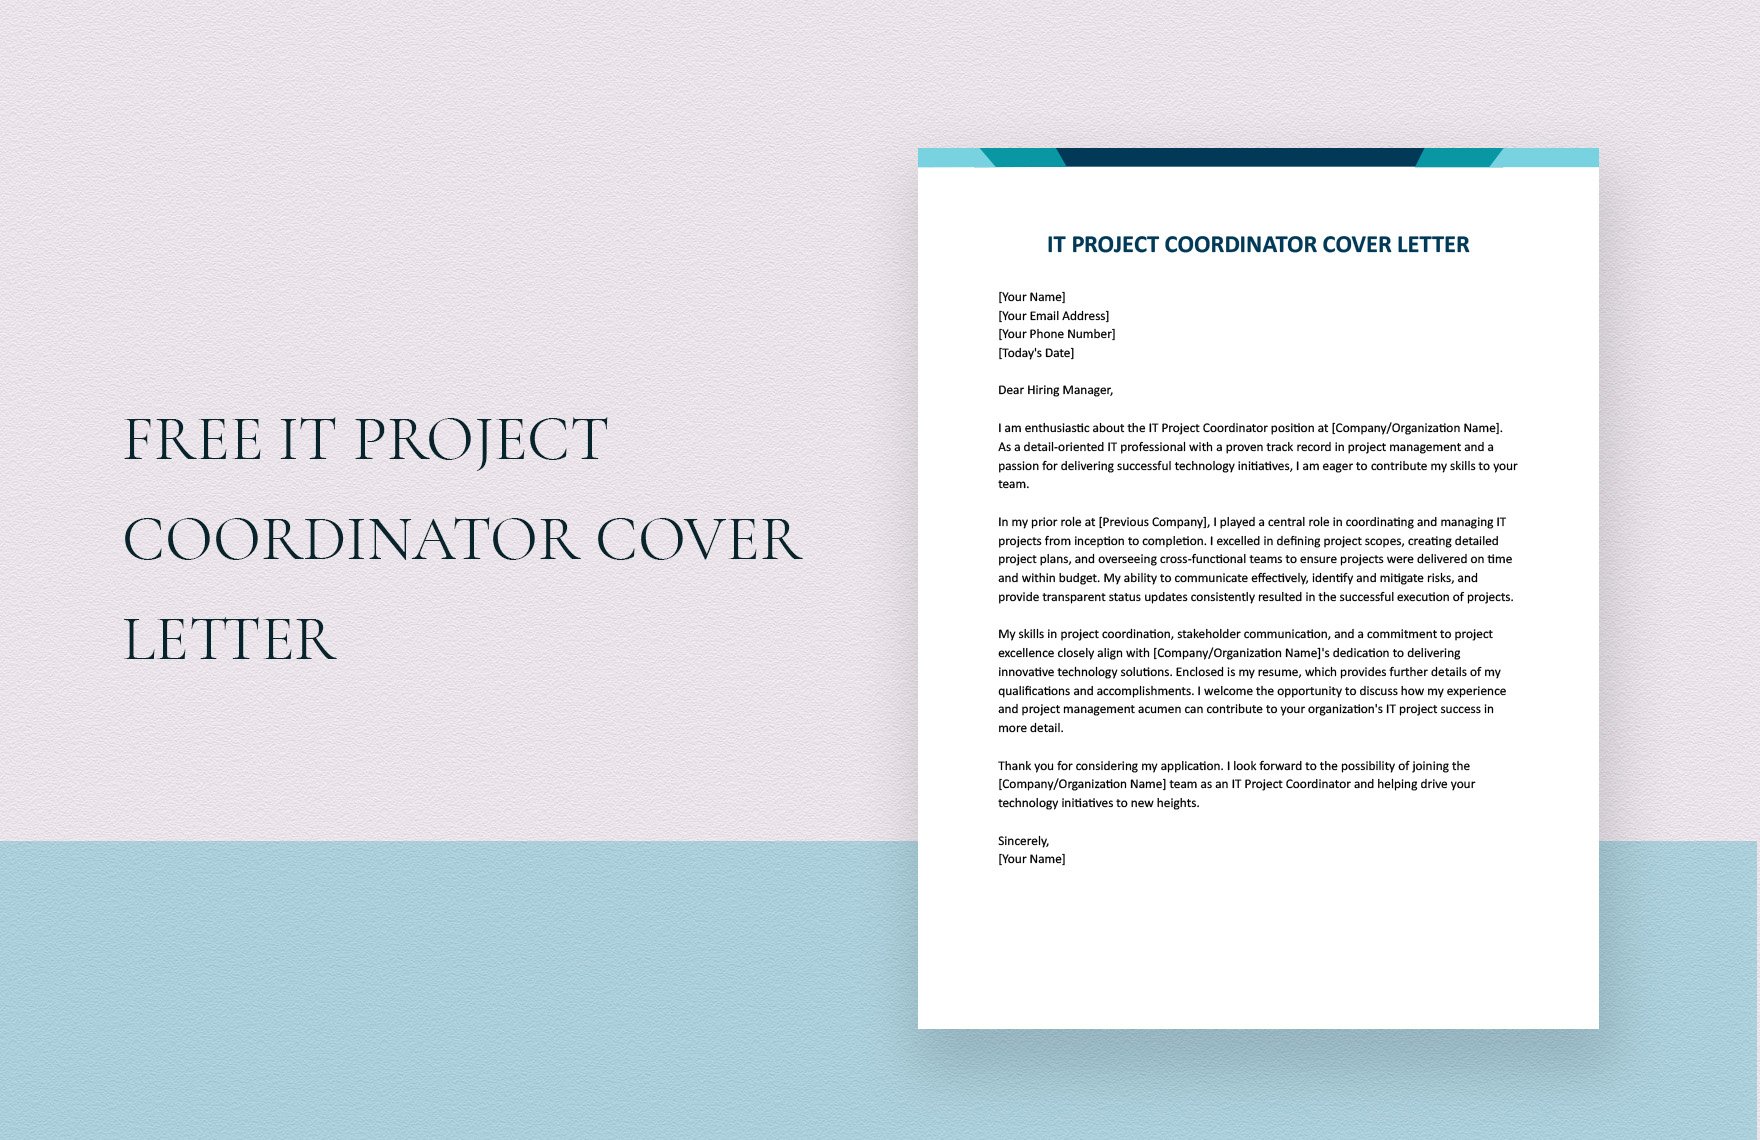 IT Project Coordinator Cover Letter in Word, Google Docs